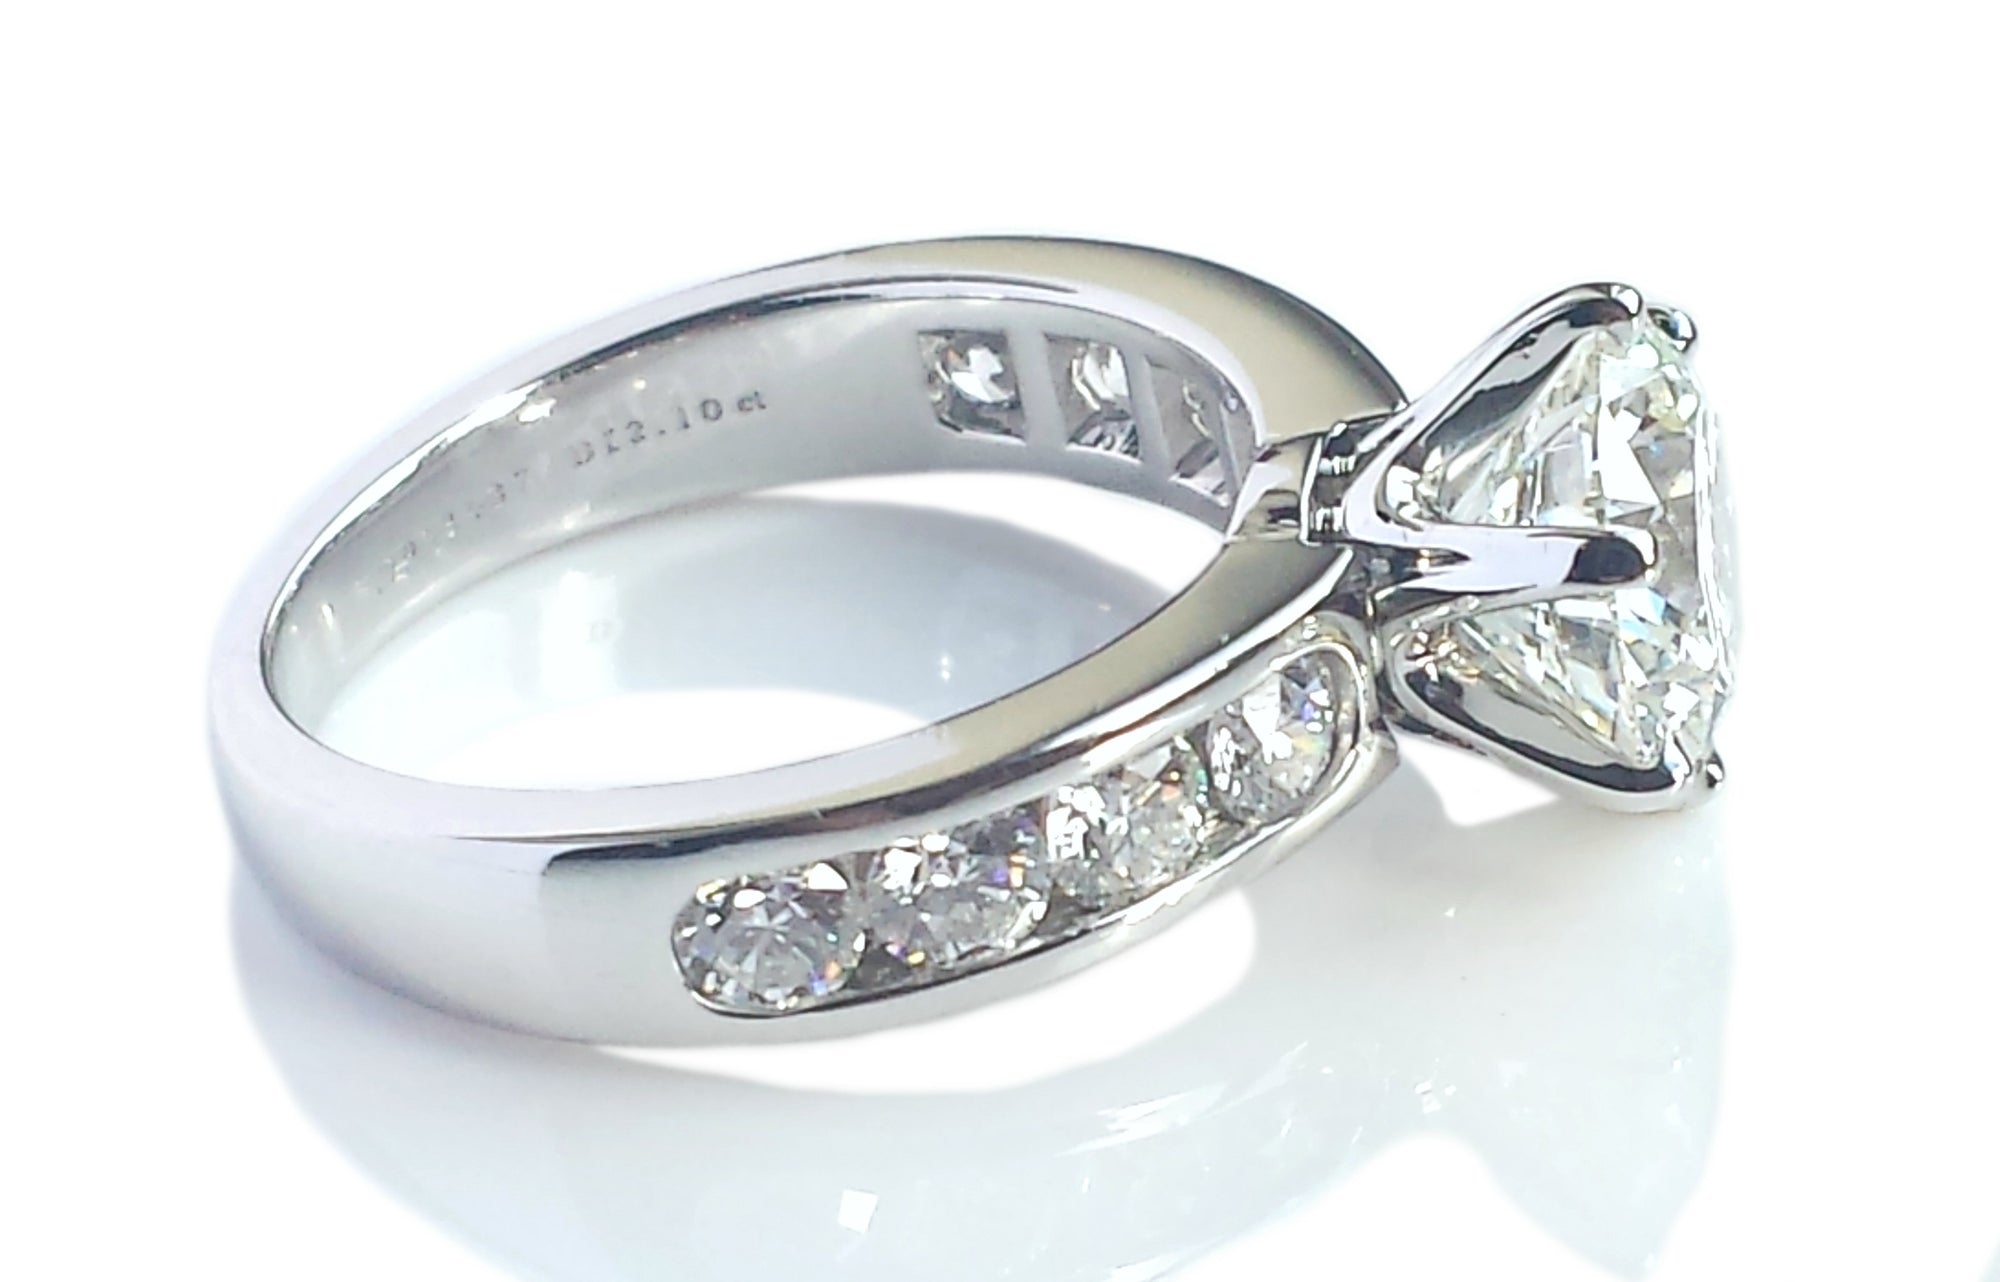 Tiffany & Co. 2.84tcw I/VVS2 Round Brilliant Diamond Engagement Ring with Side Stones